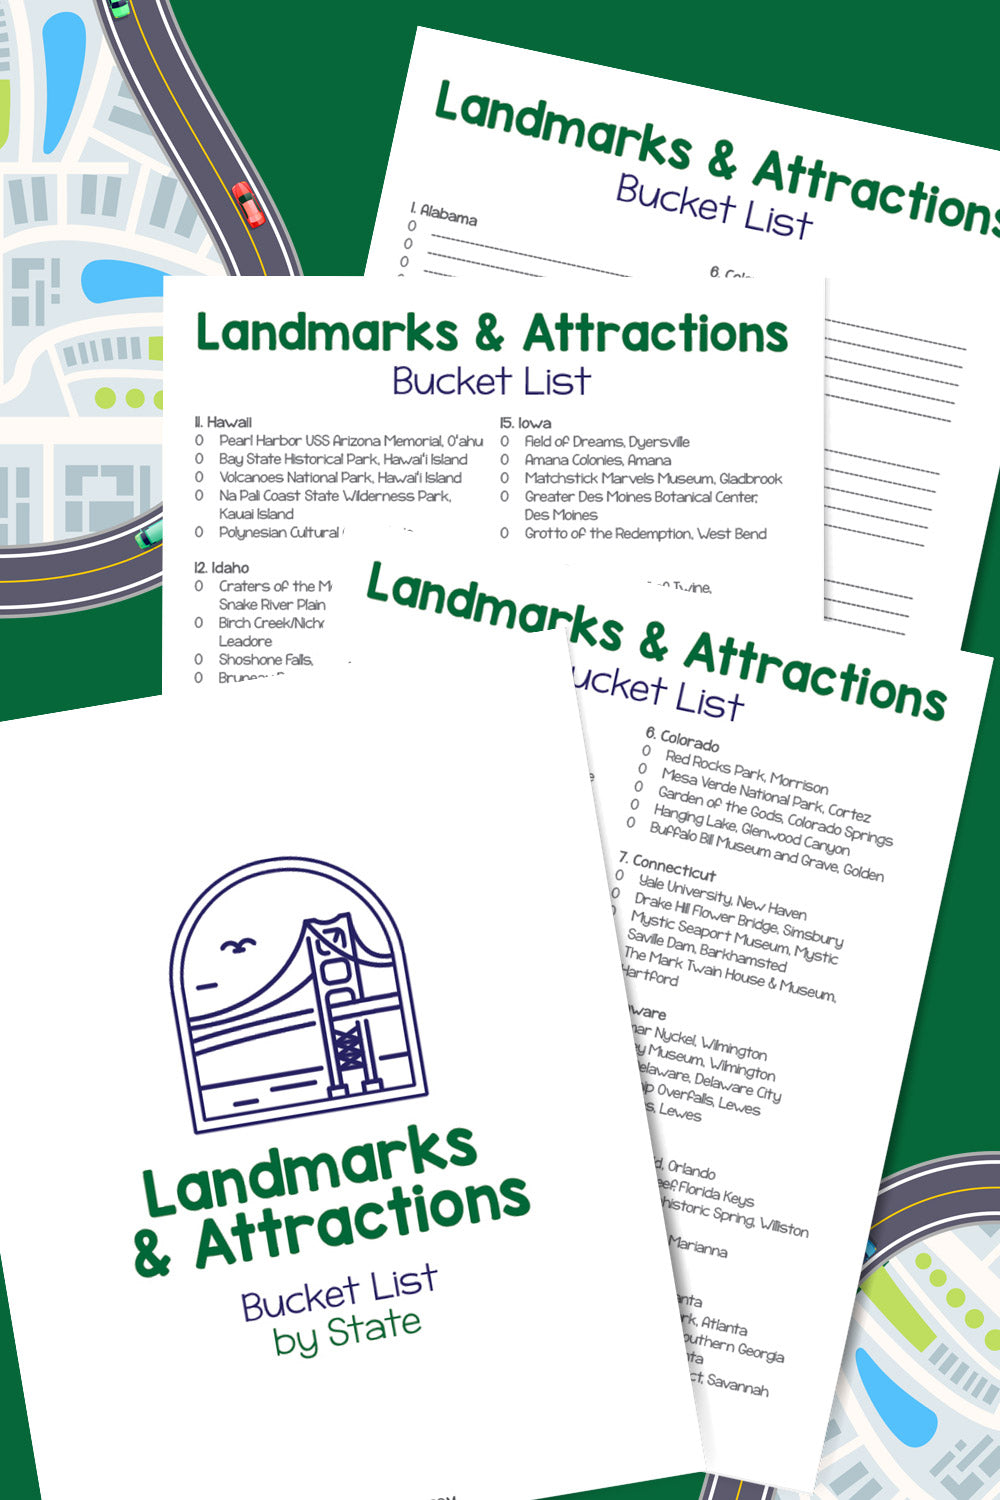 Landmarks and Attractions Check List and Bucket List